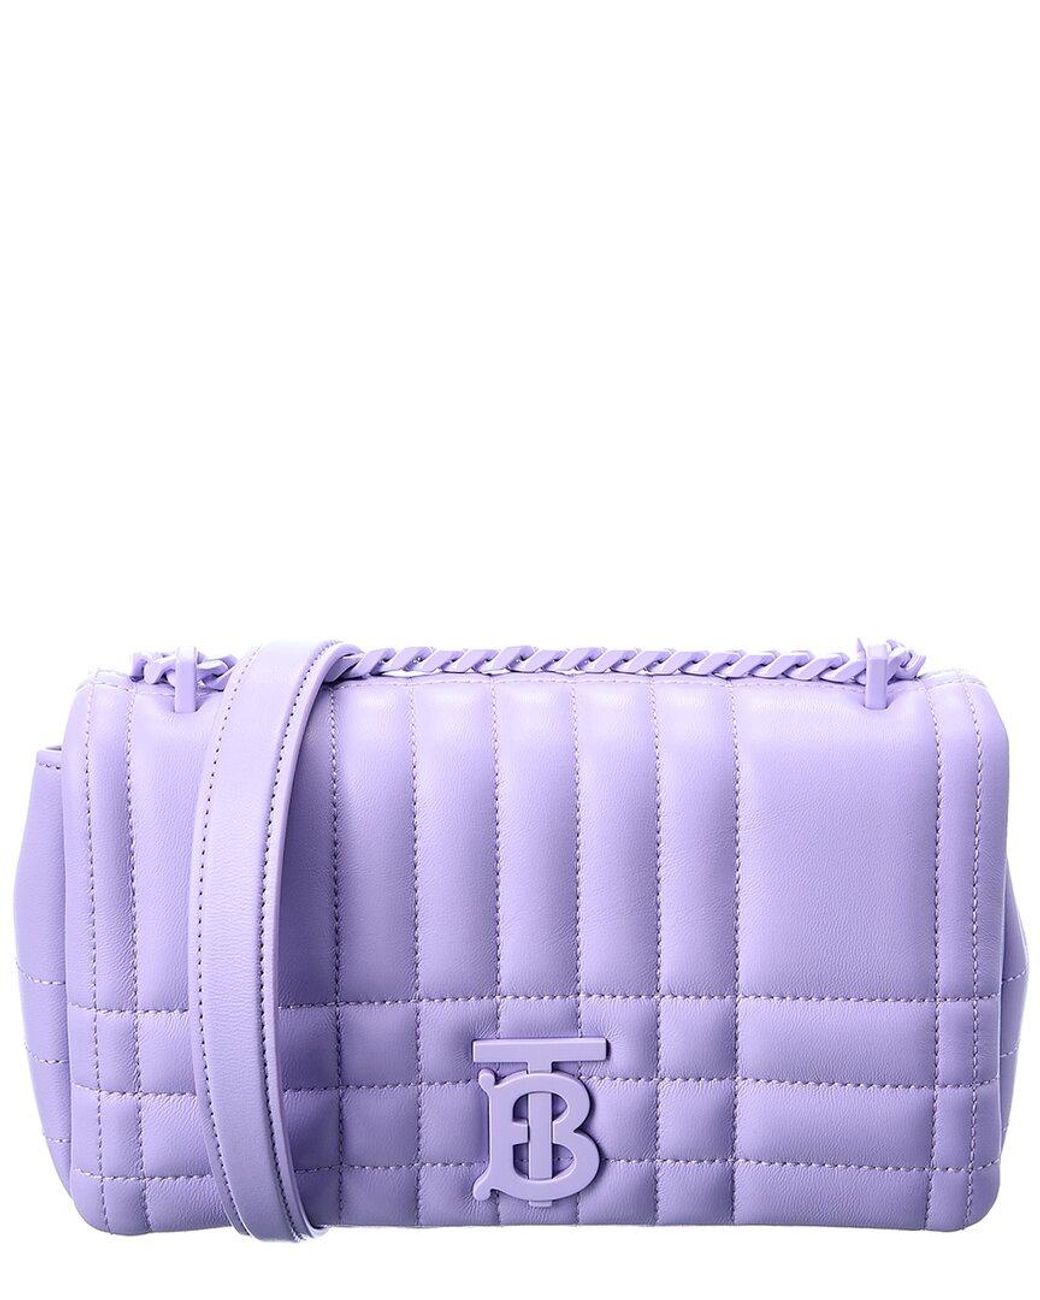 Burberry Leather Stitched Profile Handbags in Purple for Men